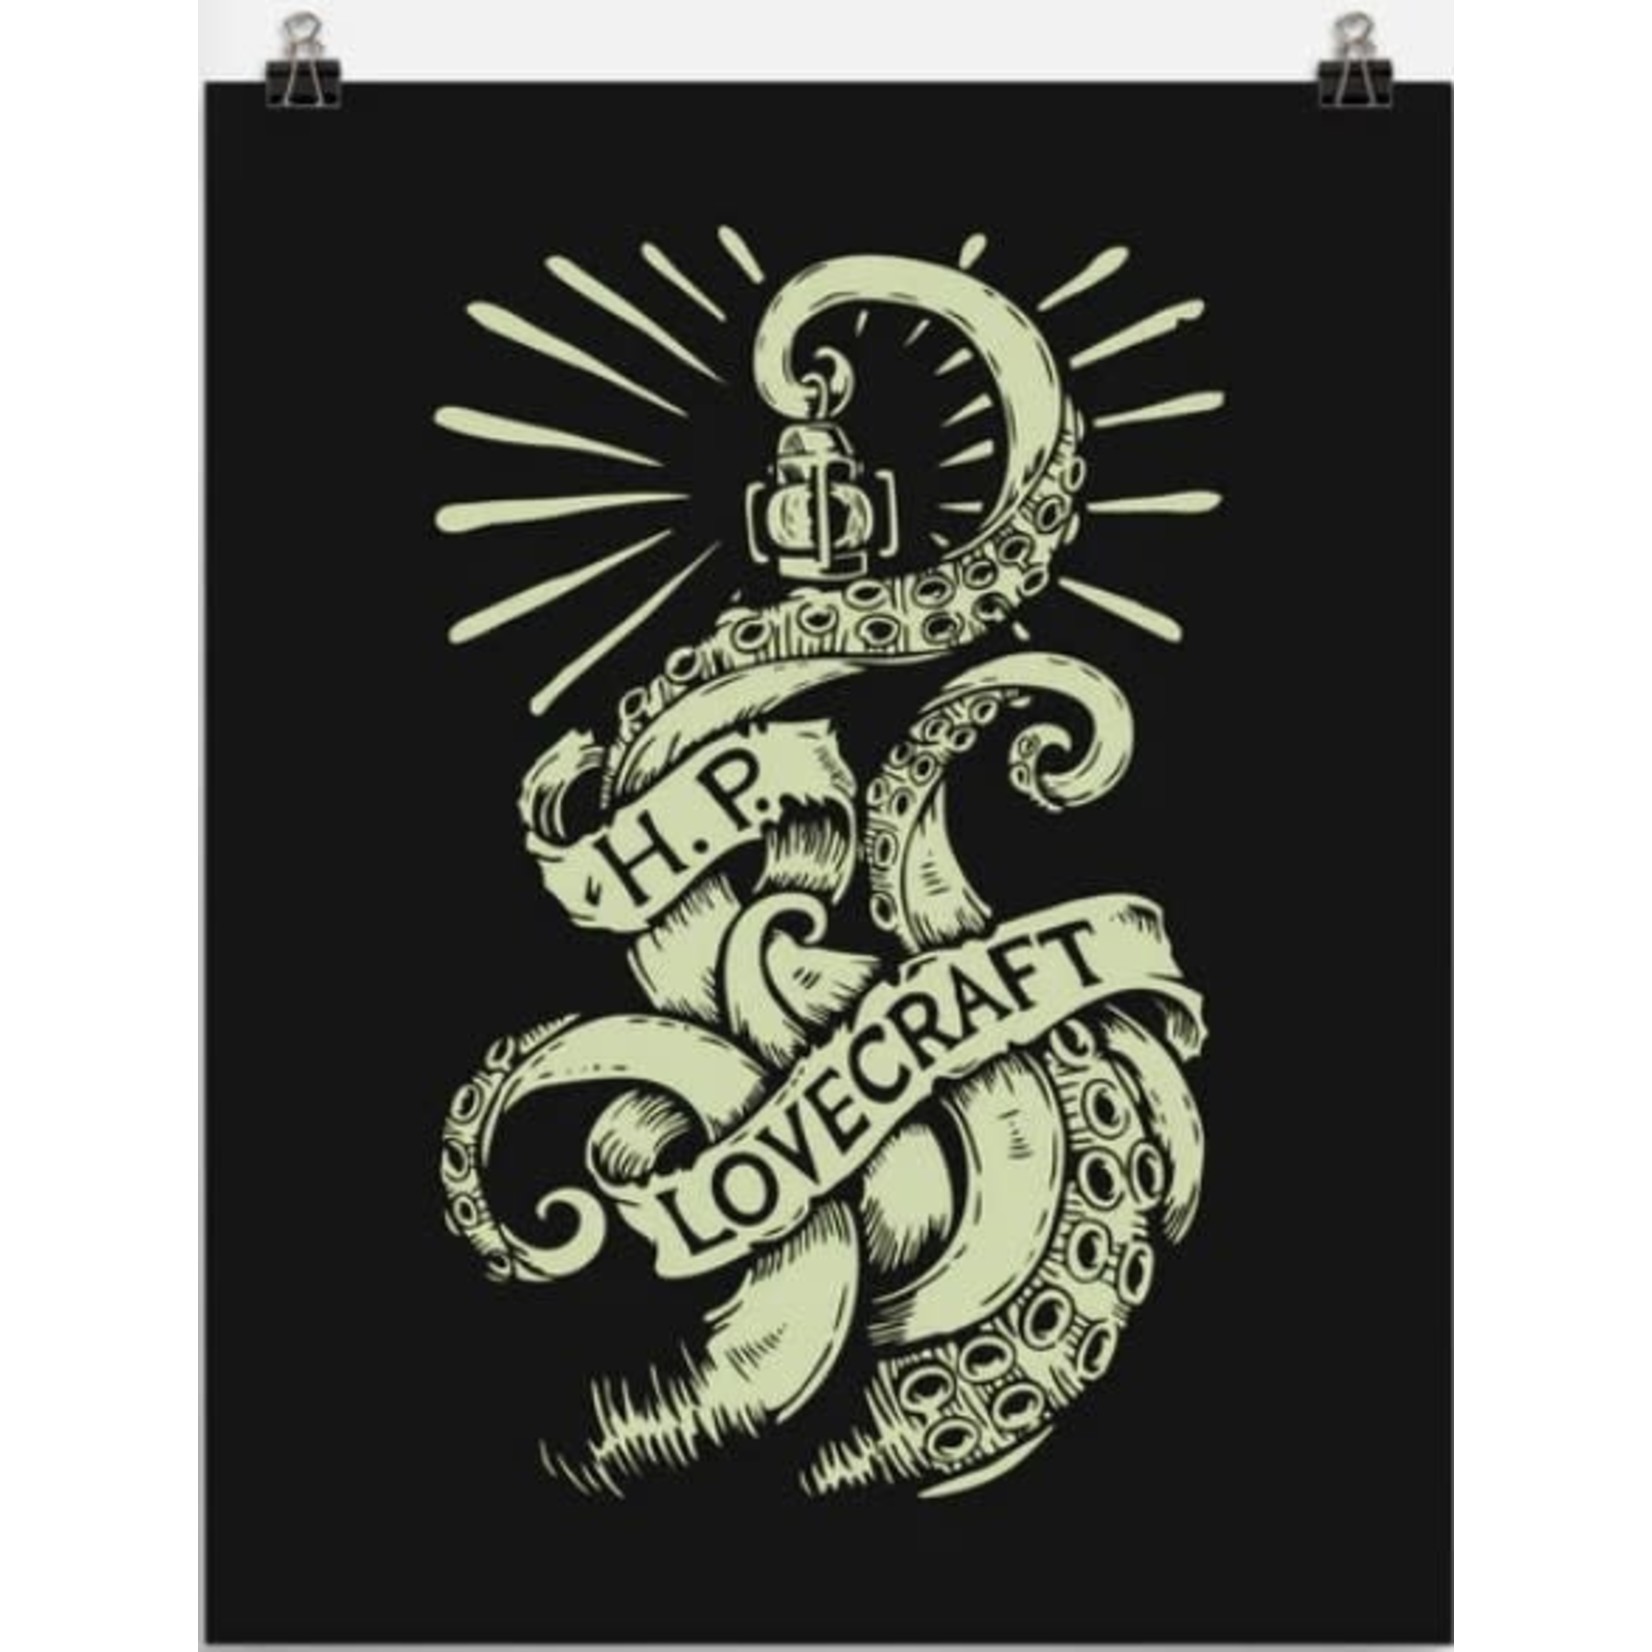 TeeFury Poster 24"x36": H.P. Lovecraft